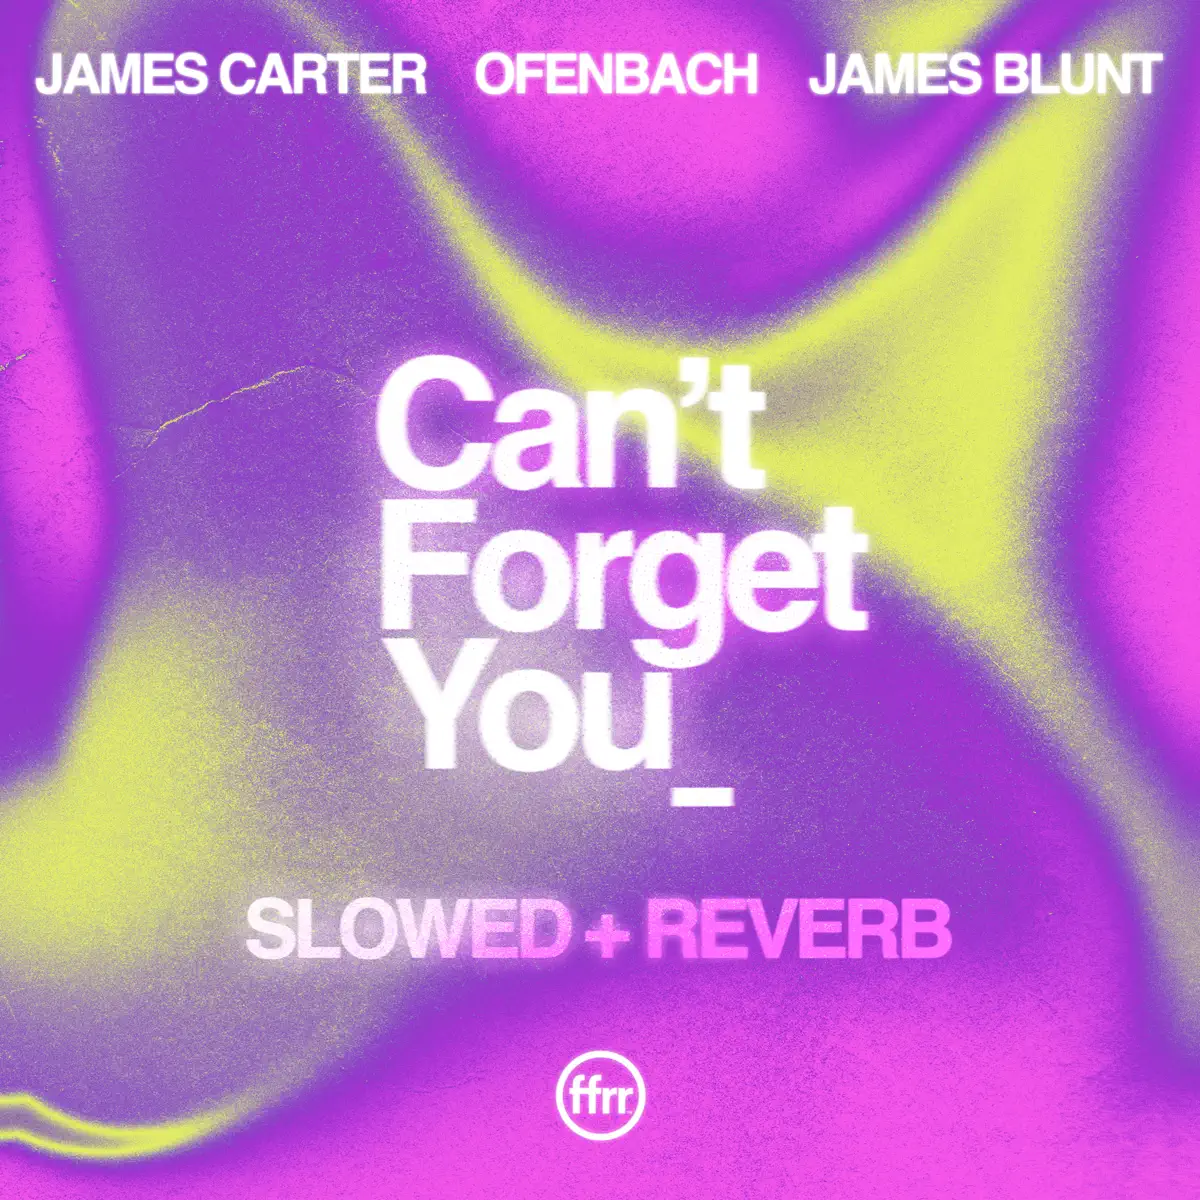 James Carter & Ofenbach - Can’t Forget You (feat. James Blunt) [slowed + reverb] - Single (2023) [iTunes Plus AAC M4A]-新房子